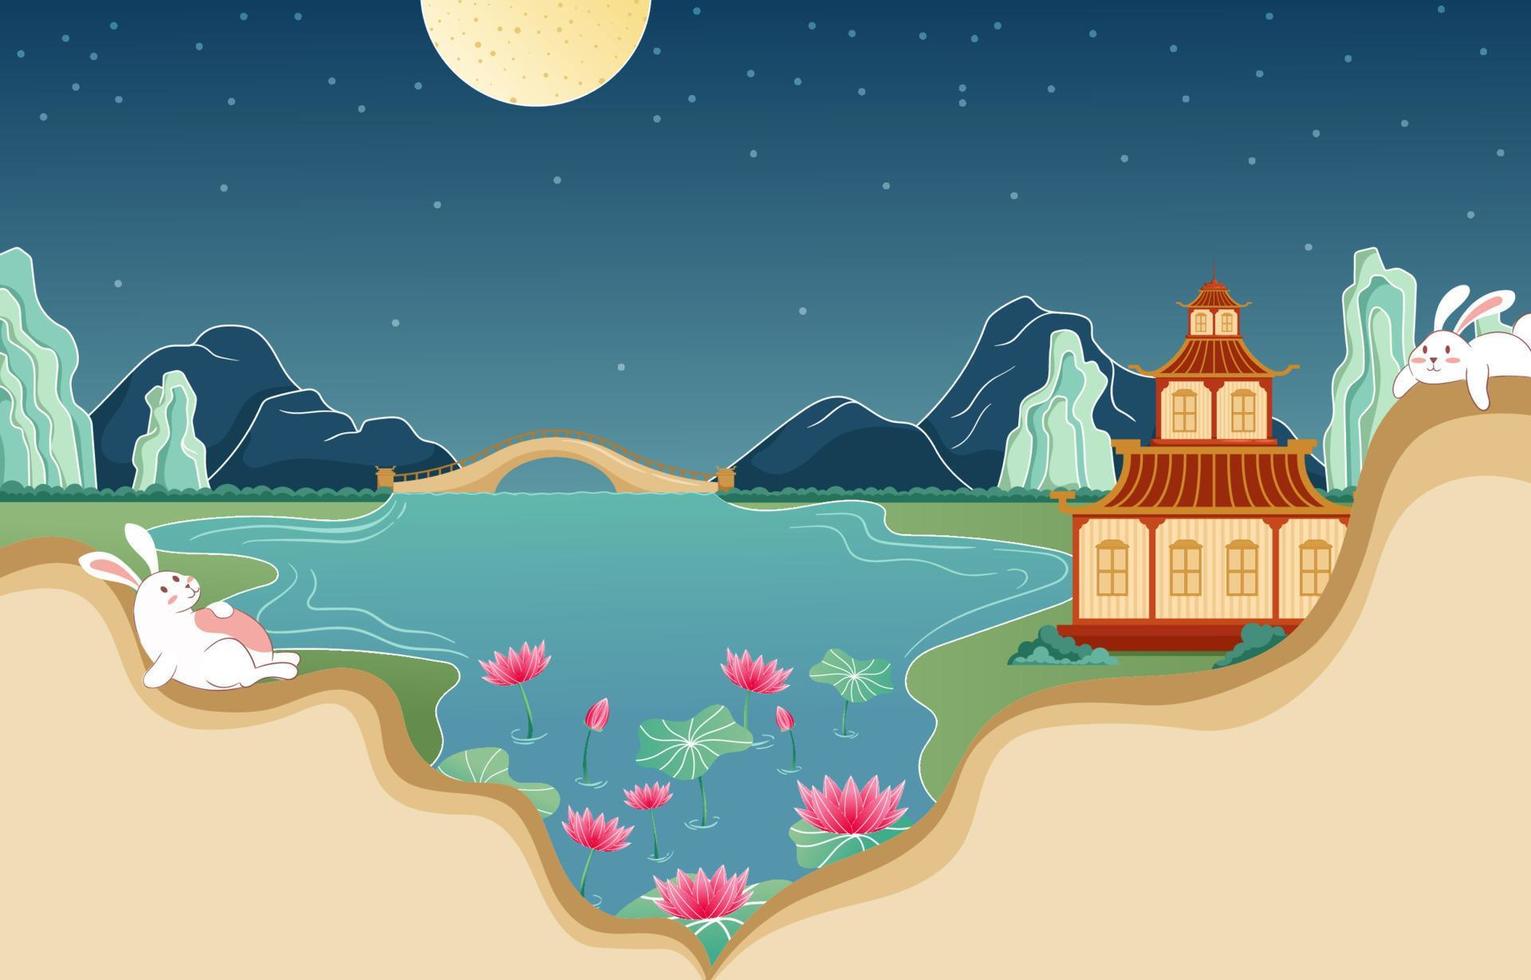 Lake in the Night during Chuseok Festivity vector